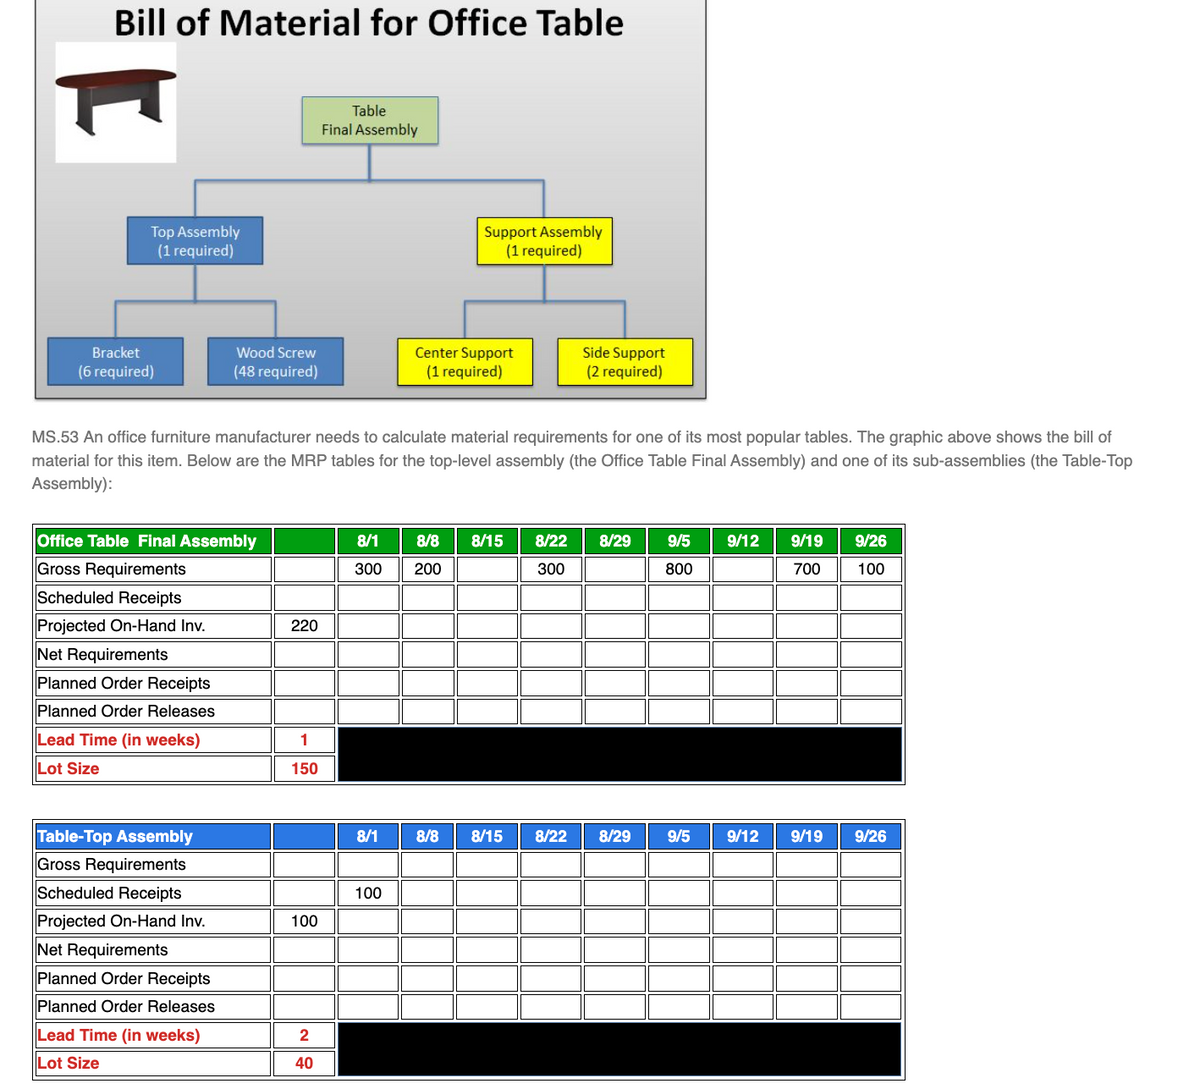 Bill of Material for Office Table
Table
Final Assembly
Top Assembly
(1 required)
Support Assembly
(1 required)
Center Support
(1 required)
Side Support
(2 required)
Bracket
Wood Screw
(6 required)
(48 required)
MS.53 An office furniture manufacturer needs to calculate material requirements for one of its most popular tables. The graphic above shows the bill of
material for this item. Below are the MRP tables for the top-level assembly (the Office Table Final Assembly) and one of its sub-assemblies (the Table-Top
Assembly):
Office Table Final Assembly
8/1
8/8
8/15
8/22
8/29
9/5
9/12
9/19
9/26
Gross Requirements
Scheduled Receipts
300
200
300
800
700
100
Projected On-Hand Inv.
220
Net Requirements
Planned Order Receipts
Planned Order Releases
Lead Time (in weeks)
1
Lot Size
150
Table-Top Assembly
Gross Requirements
Scheduled Receipts
8/1
8/8
8/15
8/22
8/29
9/5
9/12
9/19
9/26
100
Projected On-Hand Inv.
Net Requirements
100
Planned Order Receipts
Planned Order Releases
Lead Time (in weeks)
2
Lot Size
40
